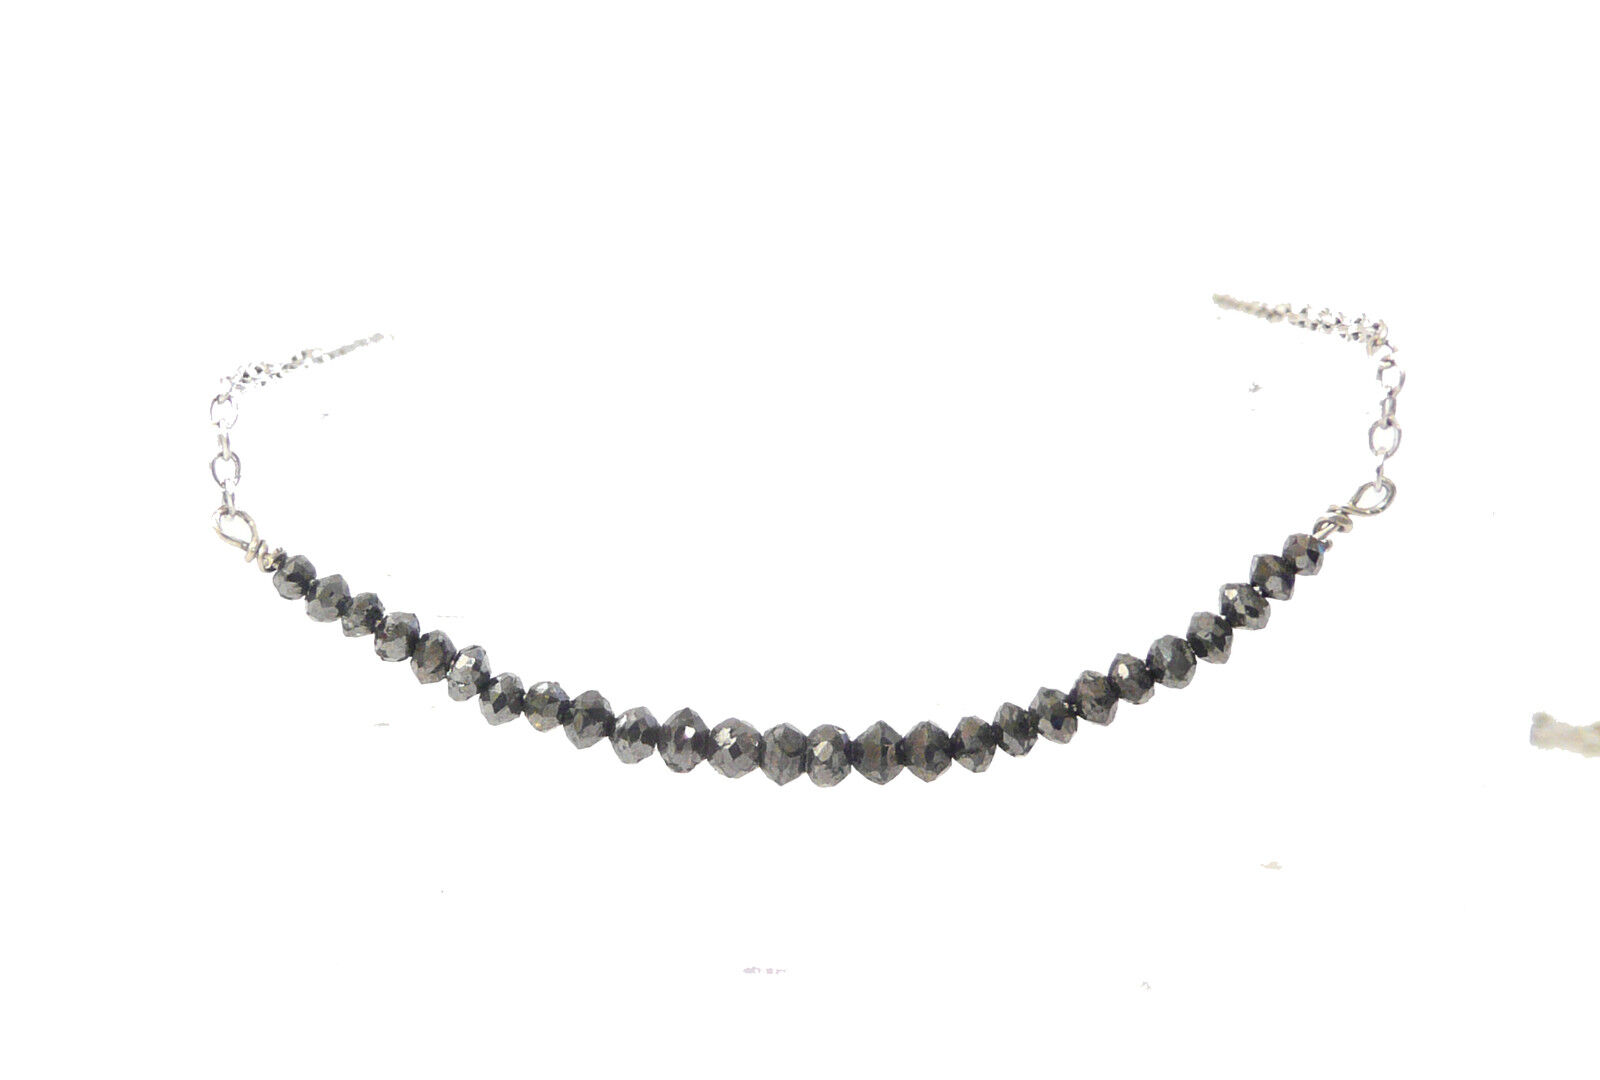 EXTREME QUALITY BLACK DIAMOND NECKLACE 1.40cts SOLID 18K GOLD & PLATINUM 1g 16\